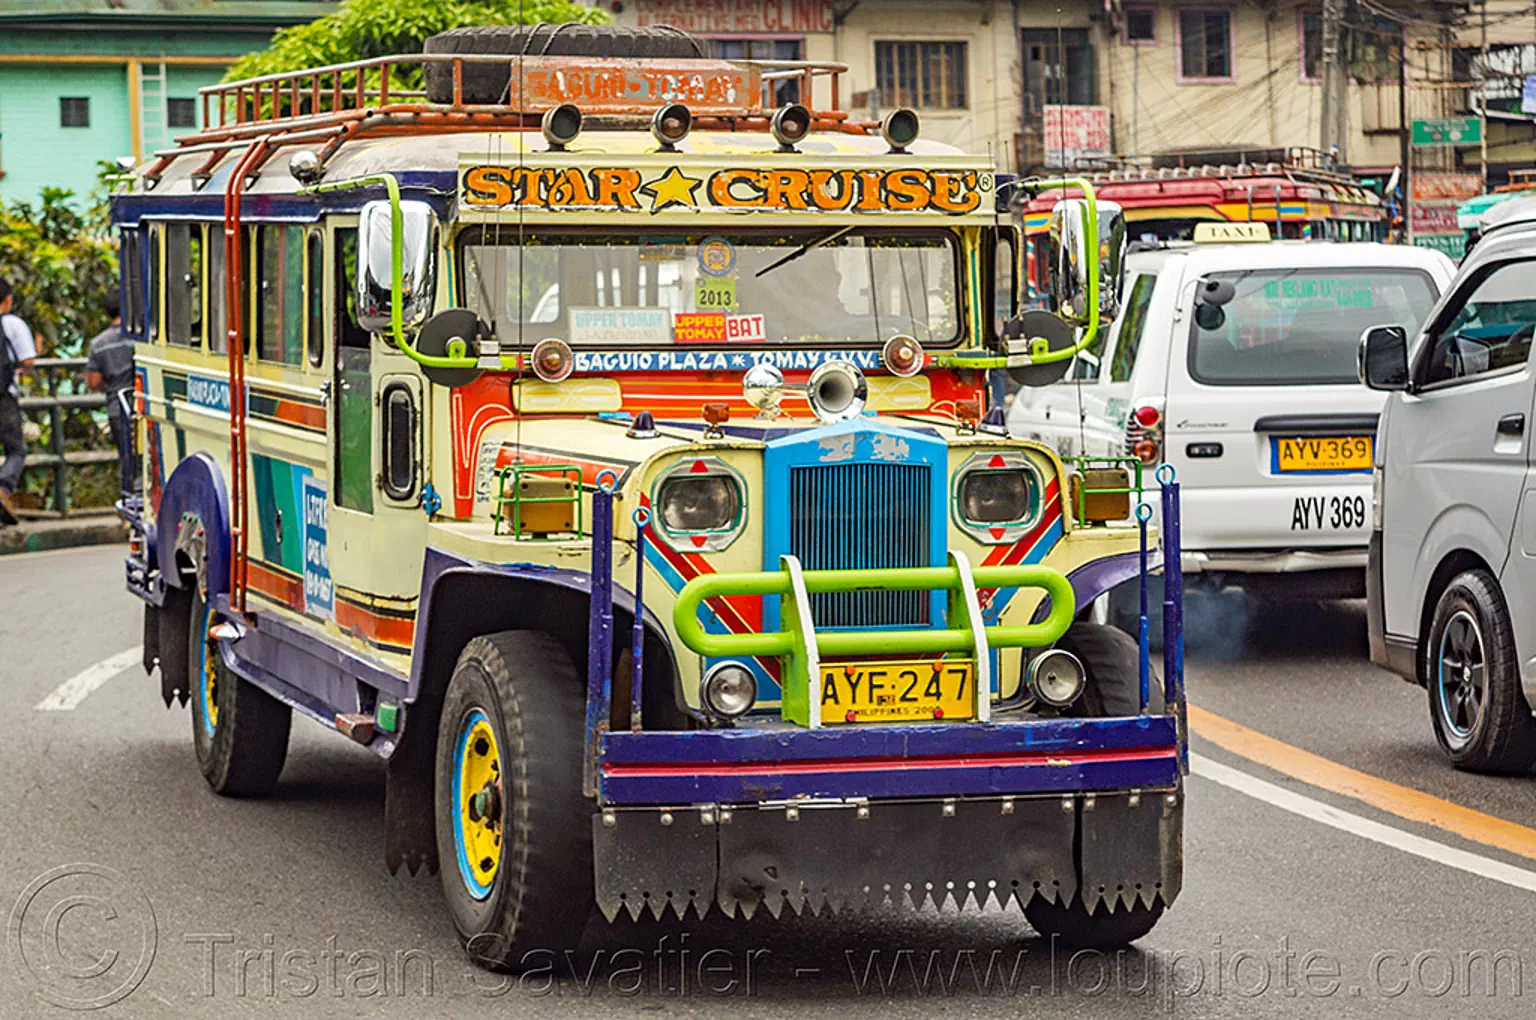 jeepney on road (philippines), baguio, colorful, decorated, front grill, jeepney, painted, philippines, road, truck